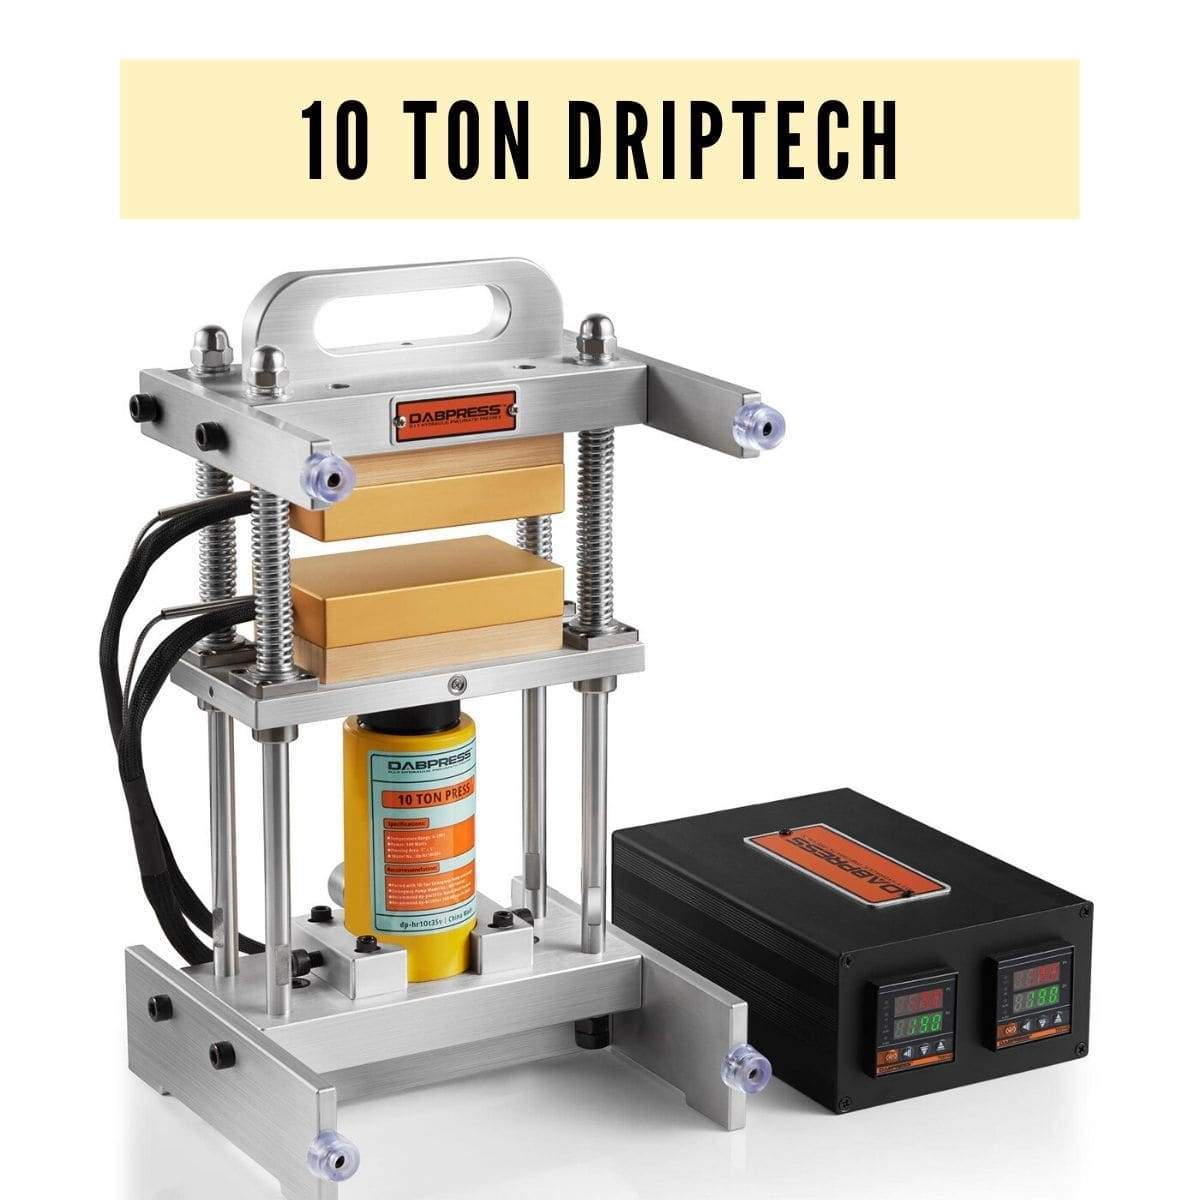 10 Ton Driptech Rosin Press - 3x5 Inches Anodized Heated Platens, 500 Watts - No Pump Included | Dabpress